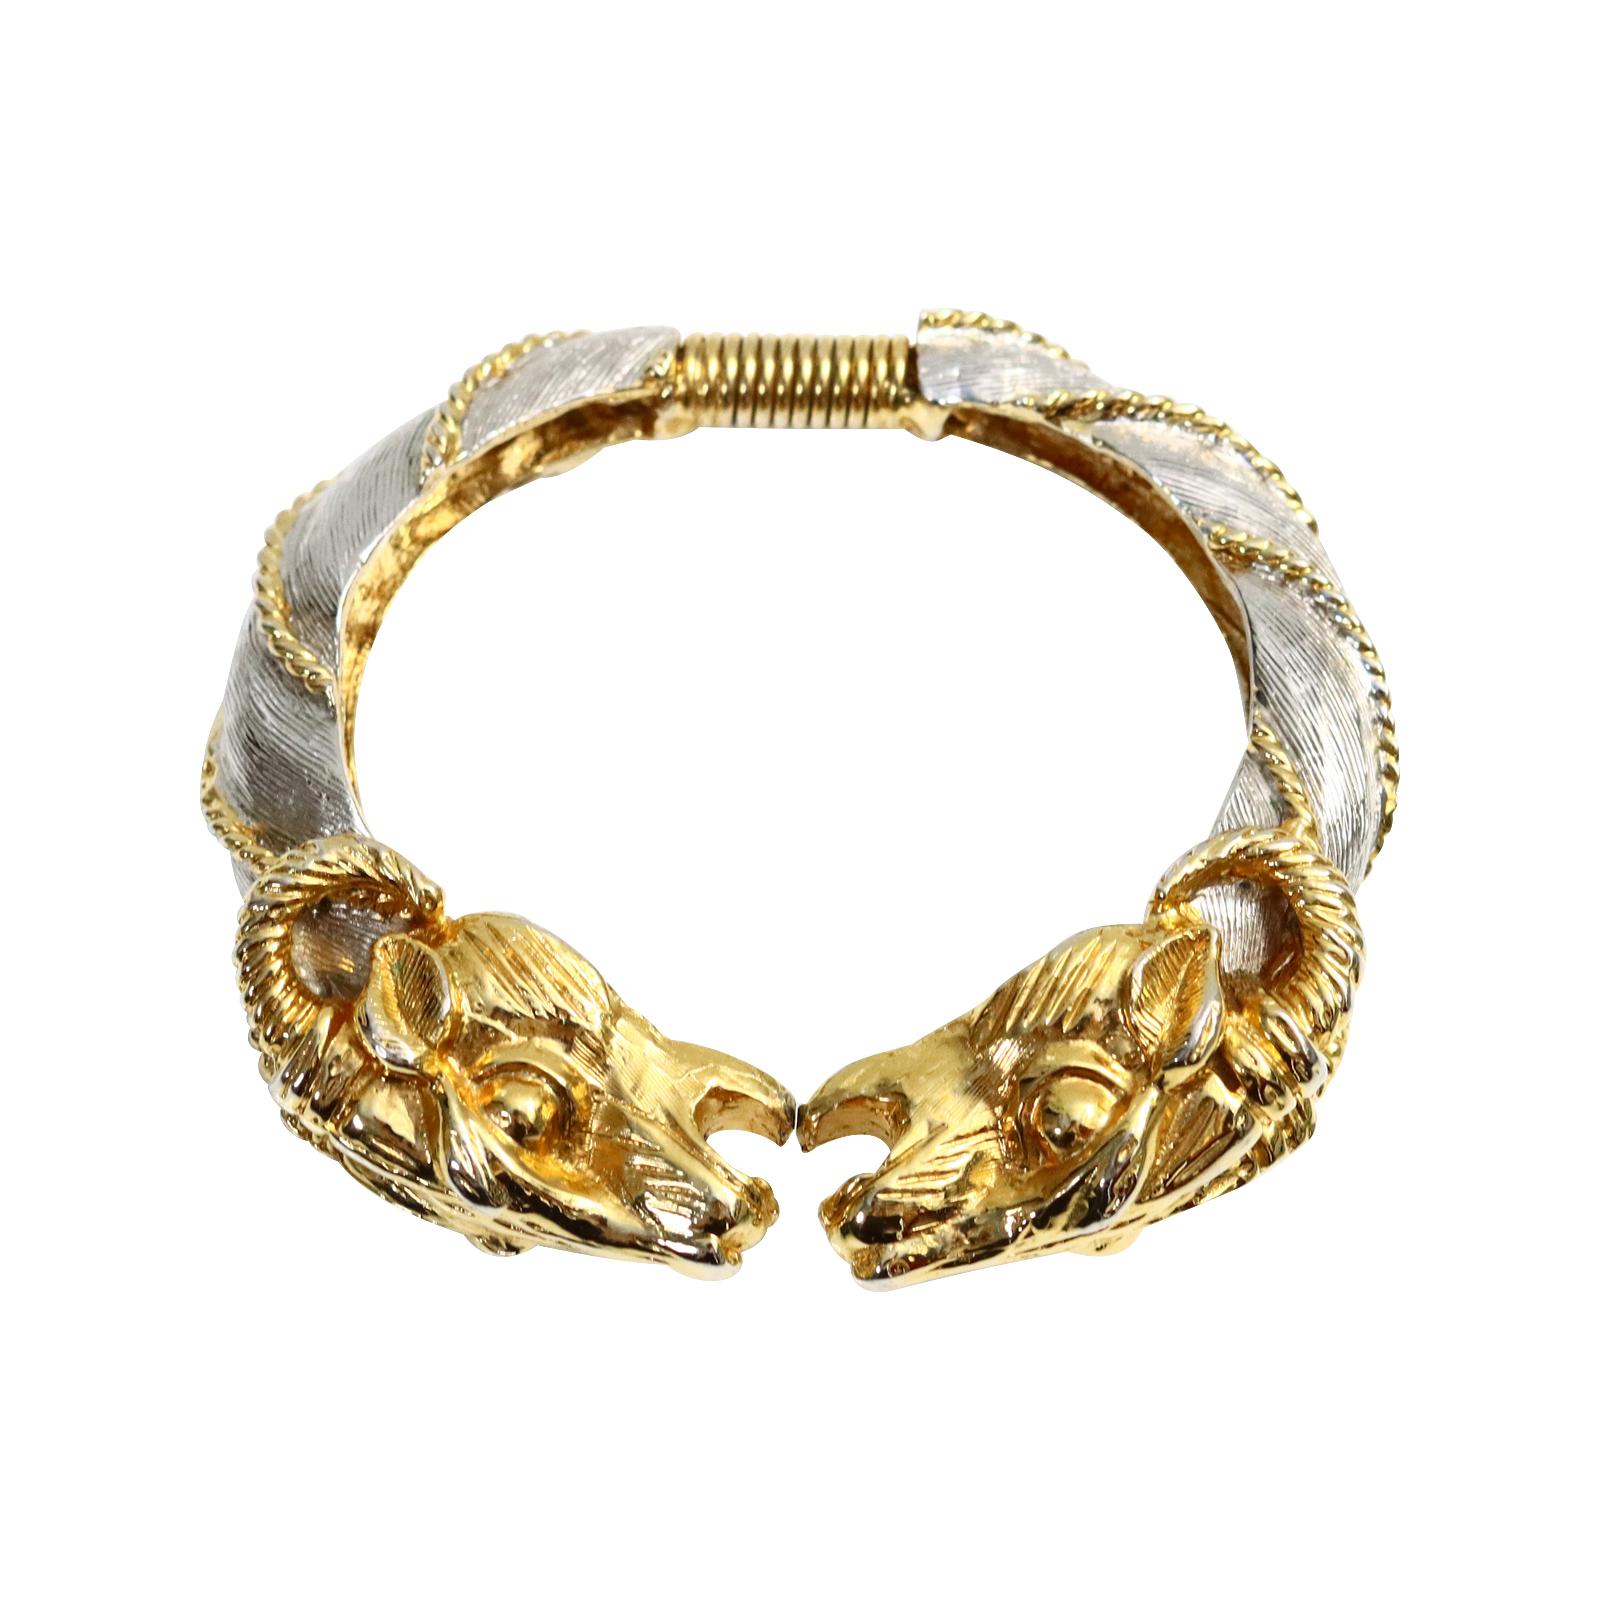 Vintage Donald Stannard Rams Head Bracelet in Silver and Gold Circa 1980s In Good Condition For Sale In New York, NY